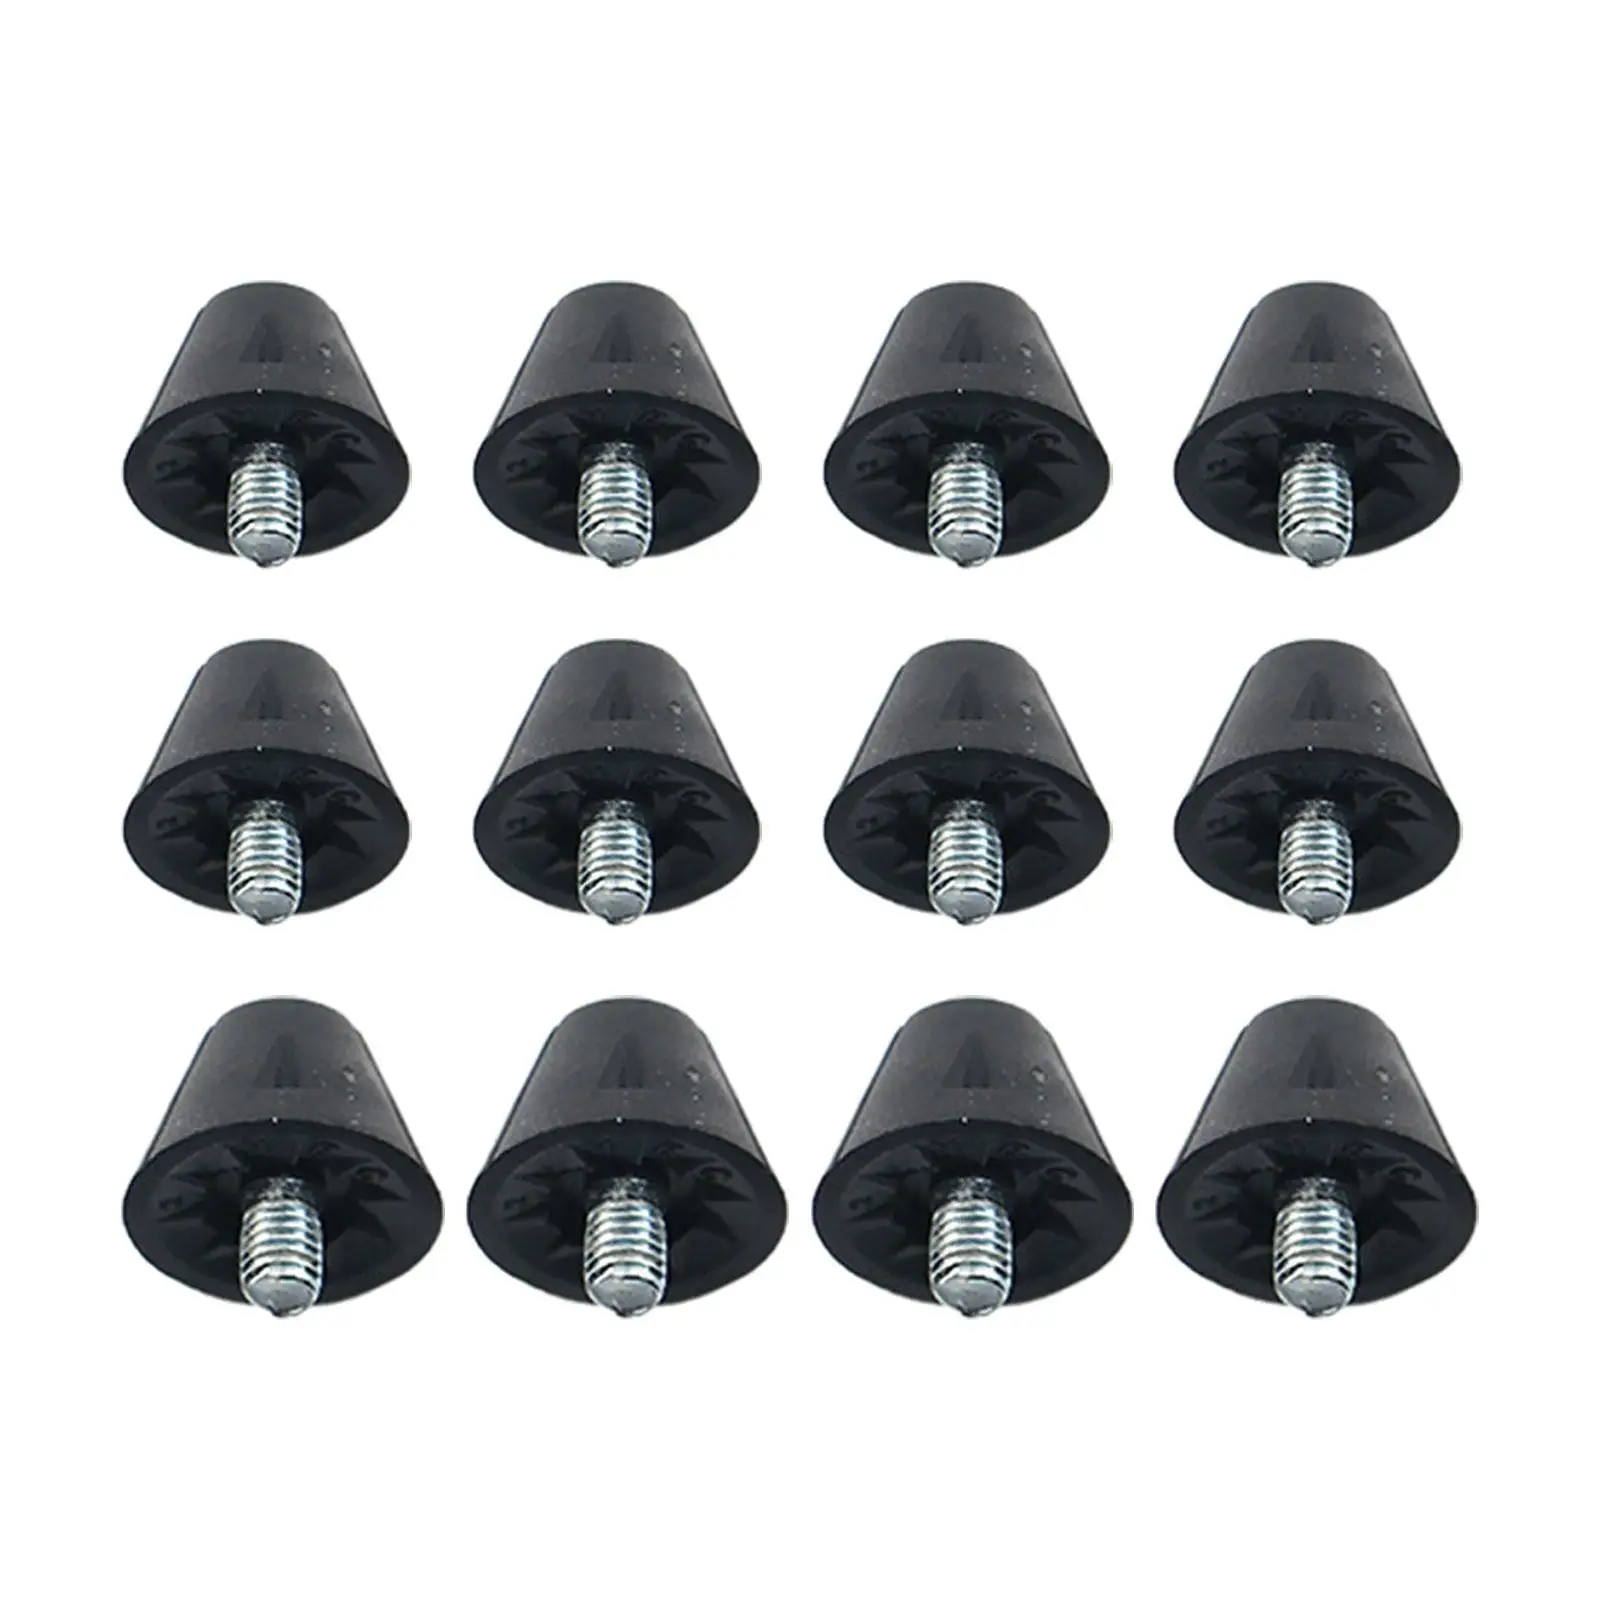 12x Football Shoe Spikes Firm Ground Professional Rugby Studs for Indoor Outdoor Sports Athletic Sneakers Competition Training